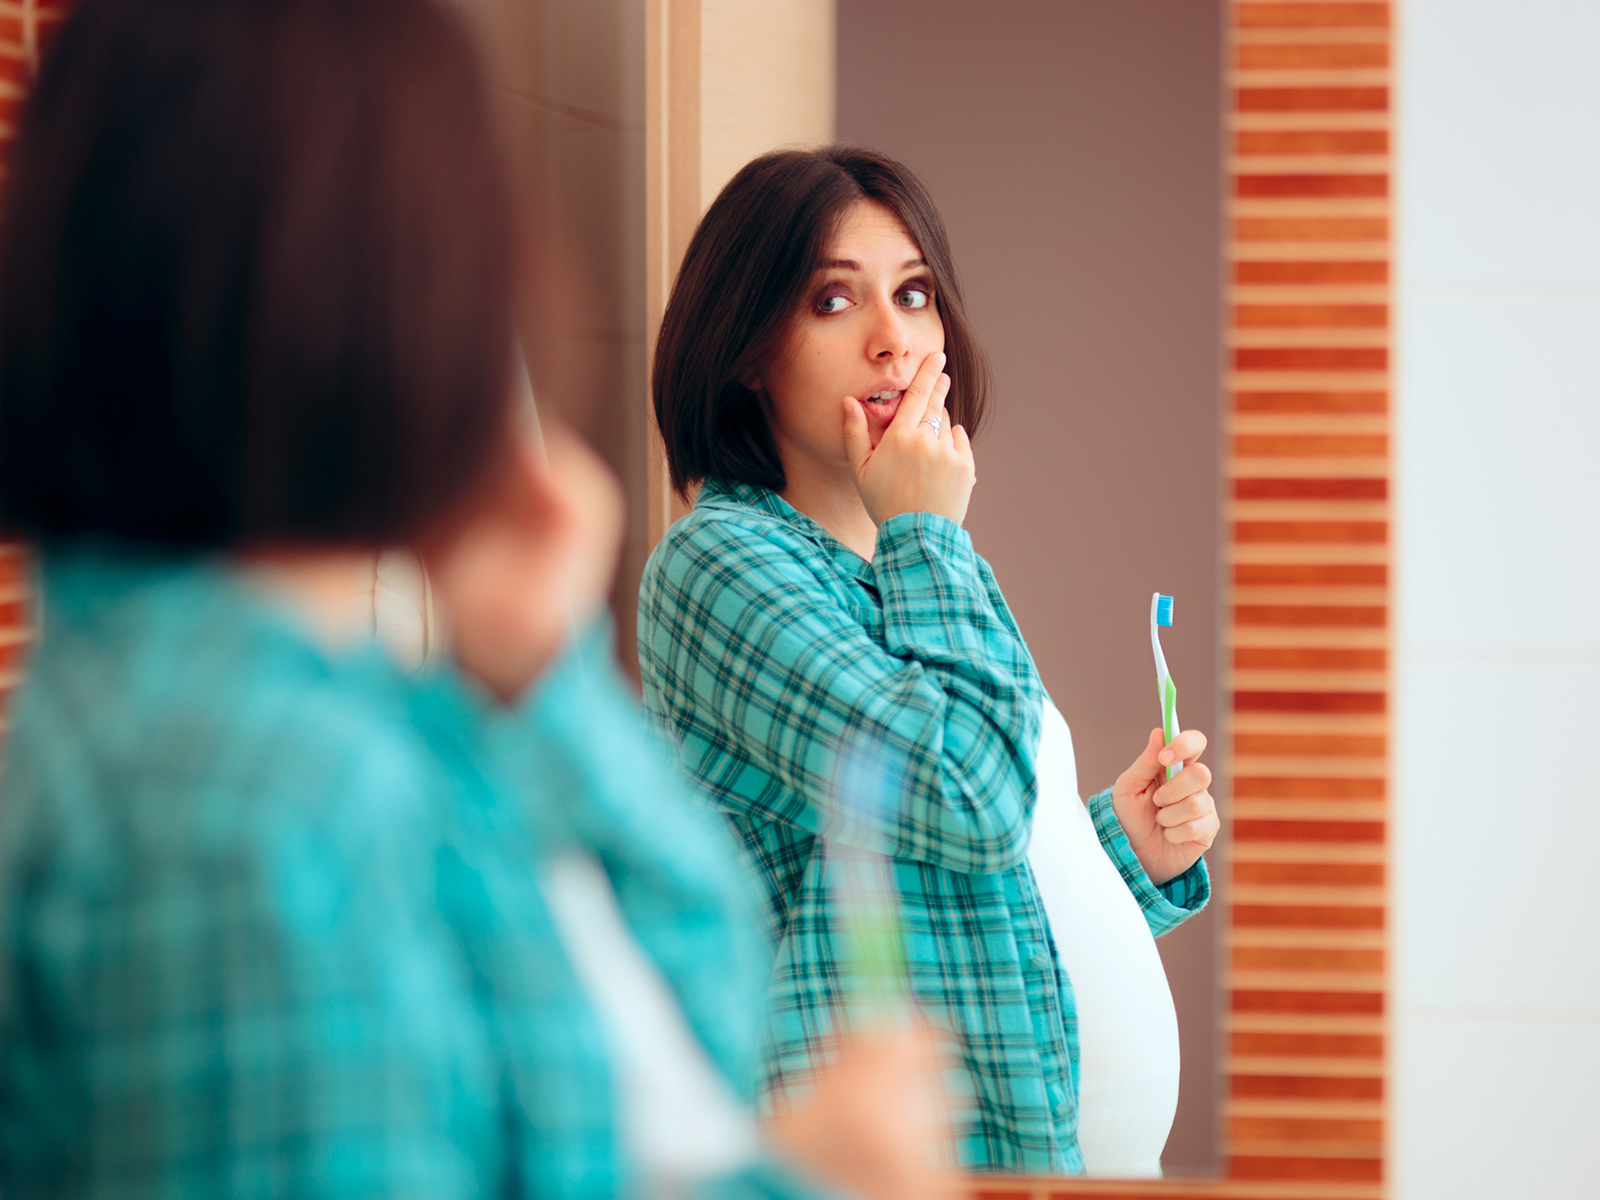 Pregnancy, Breastfeeding, and Mother’s Dental Health